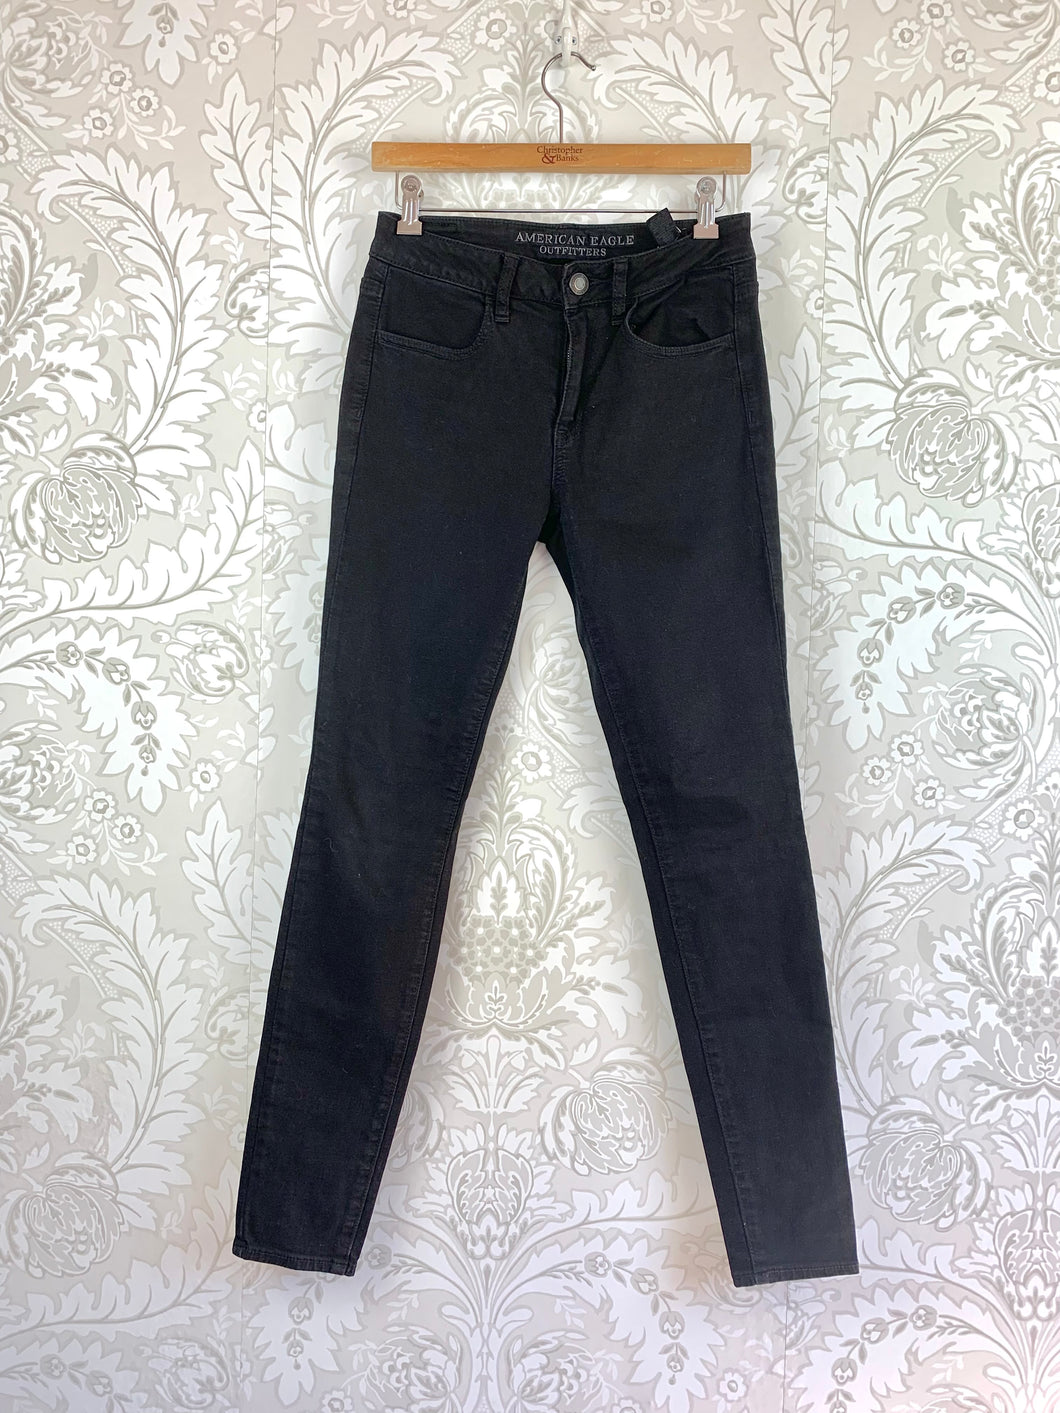 American Eagle Stretch Skinny Jeans size 6